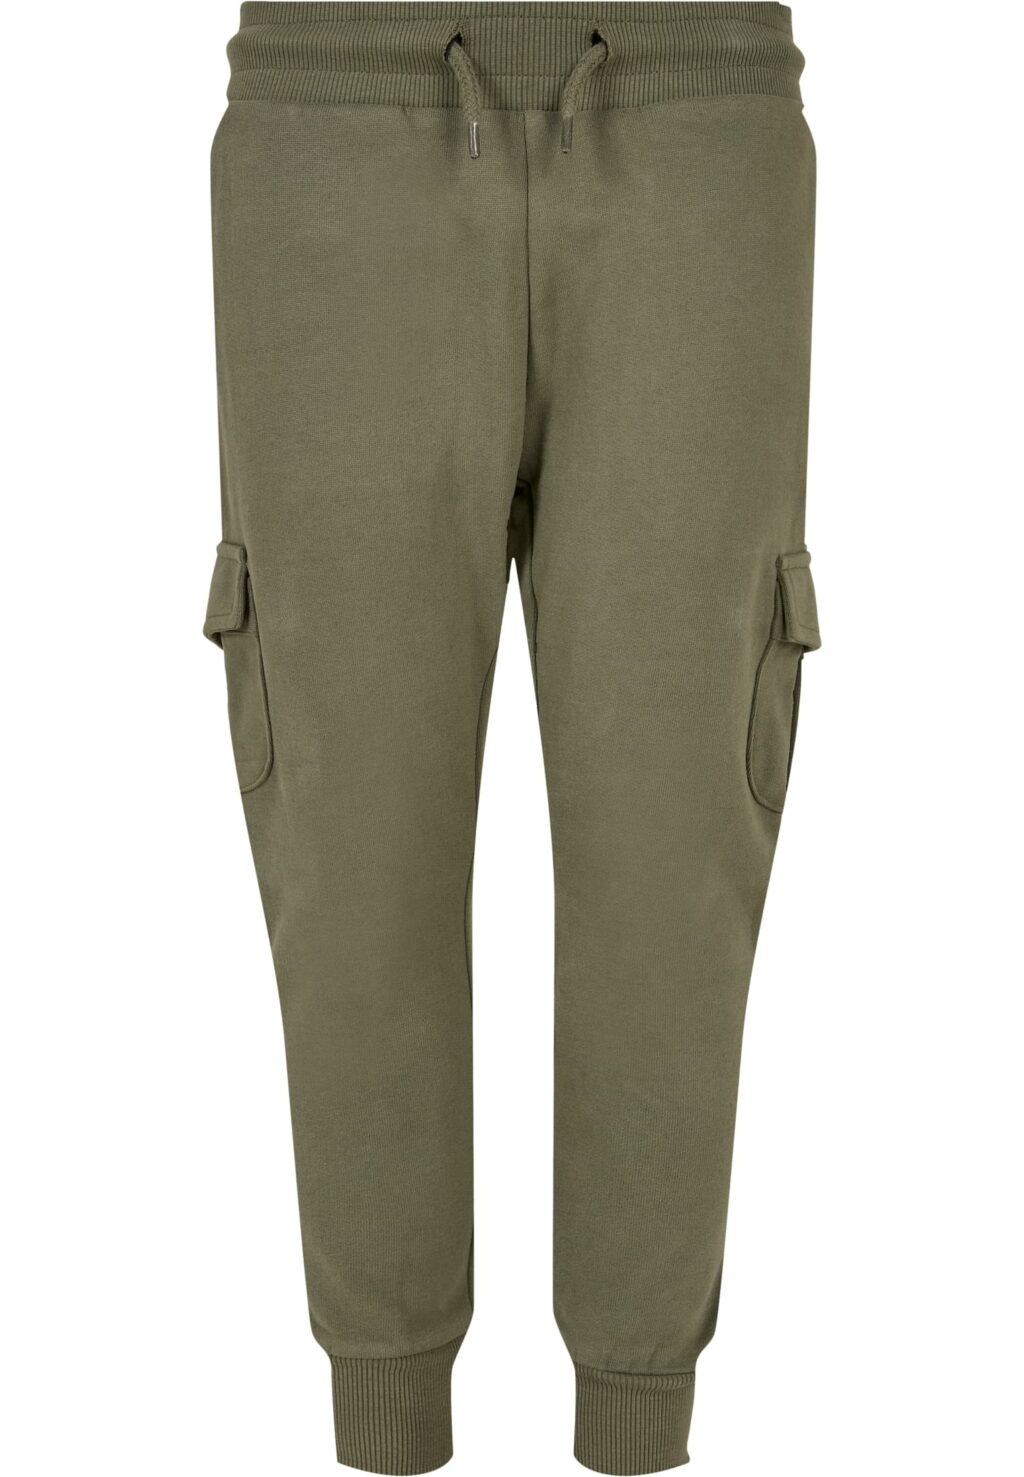 Boys Fitted Cargo Sweatpants olive UCK1395